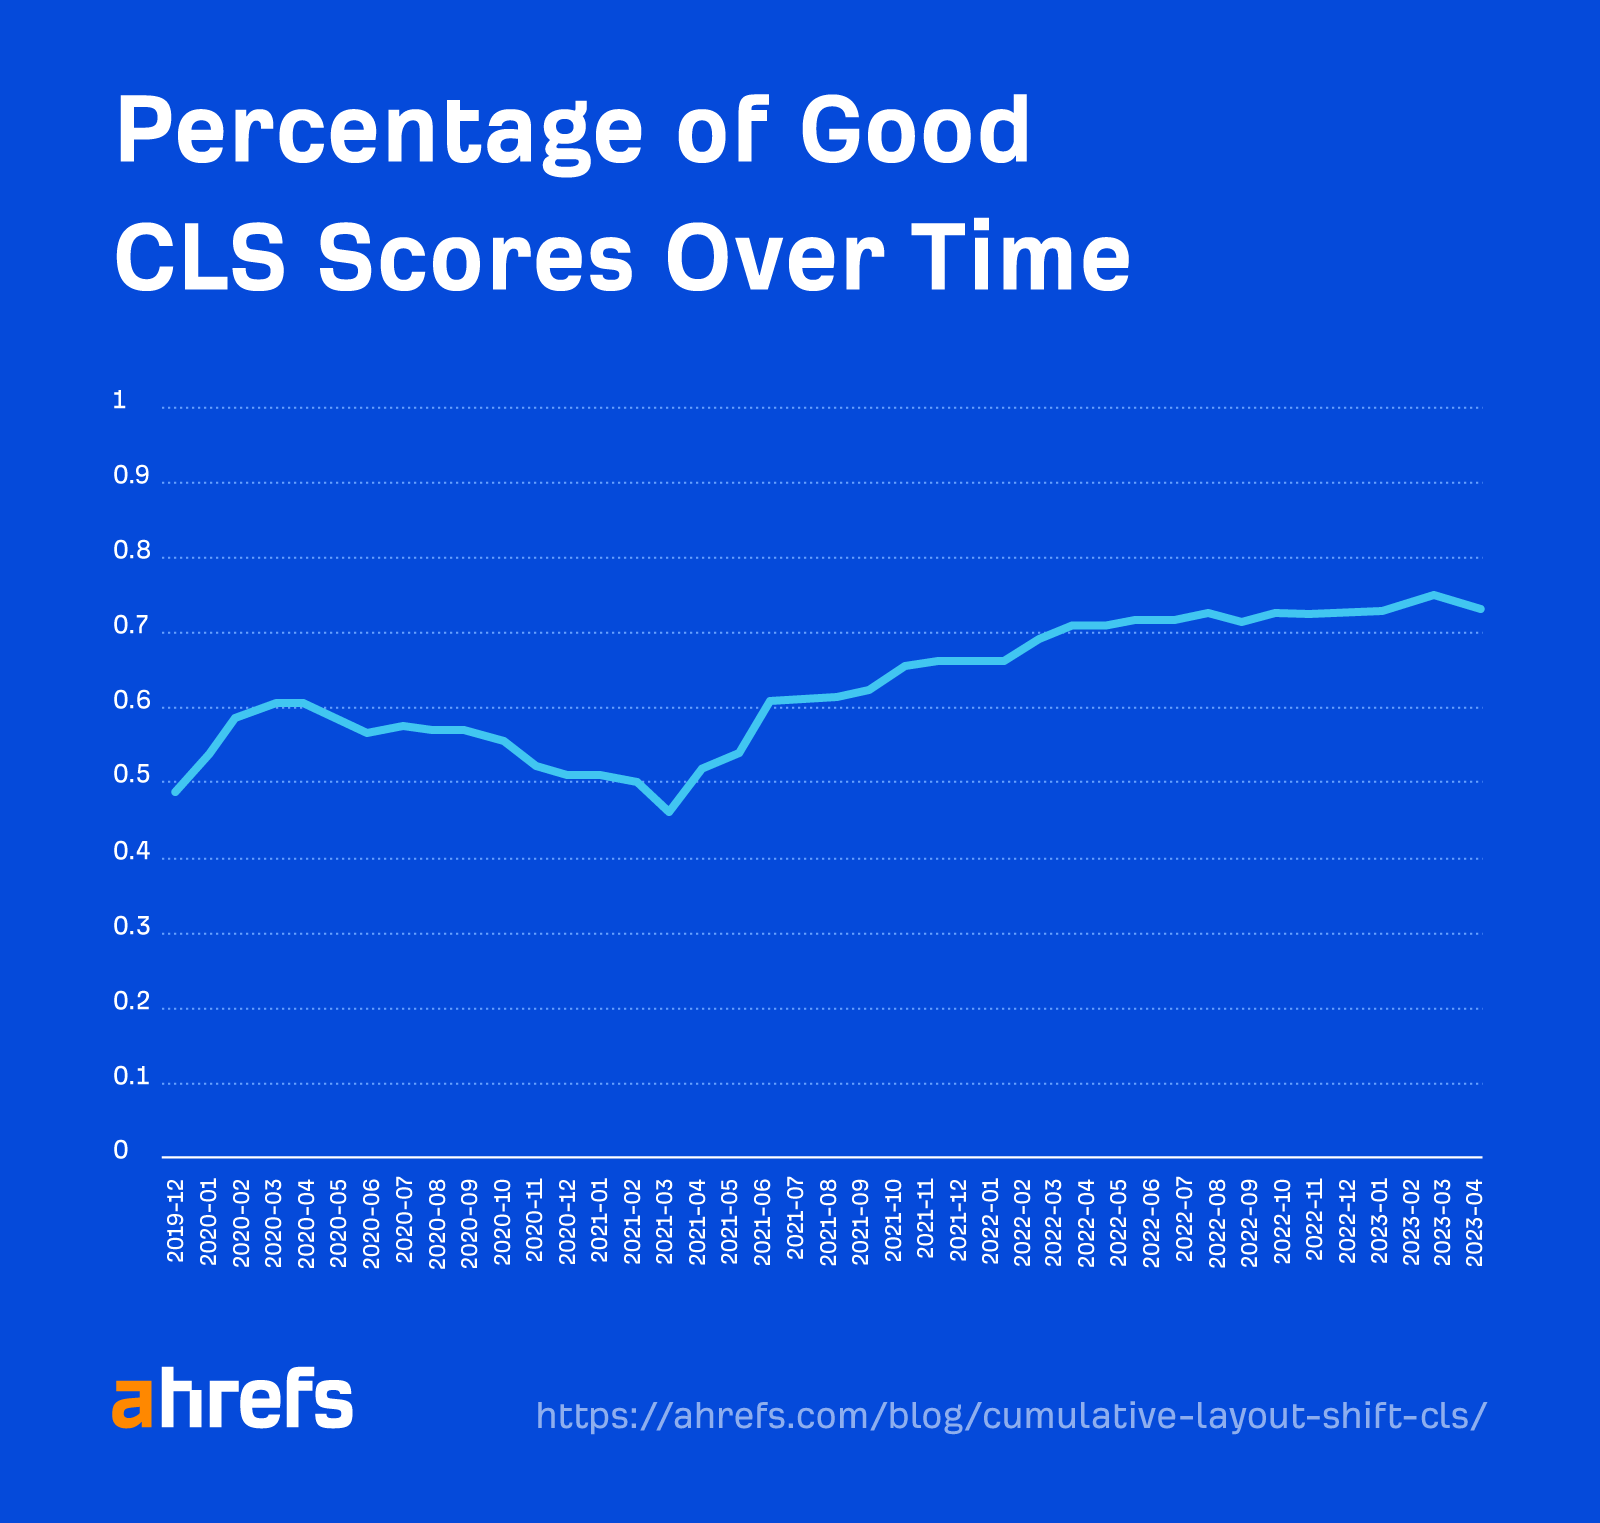 Percentage of good CLS scores from CrUX CWV data from November 2019 to April 2023